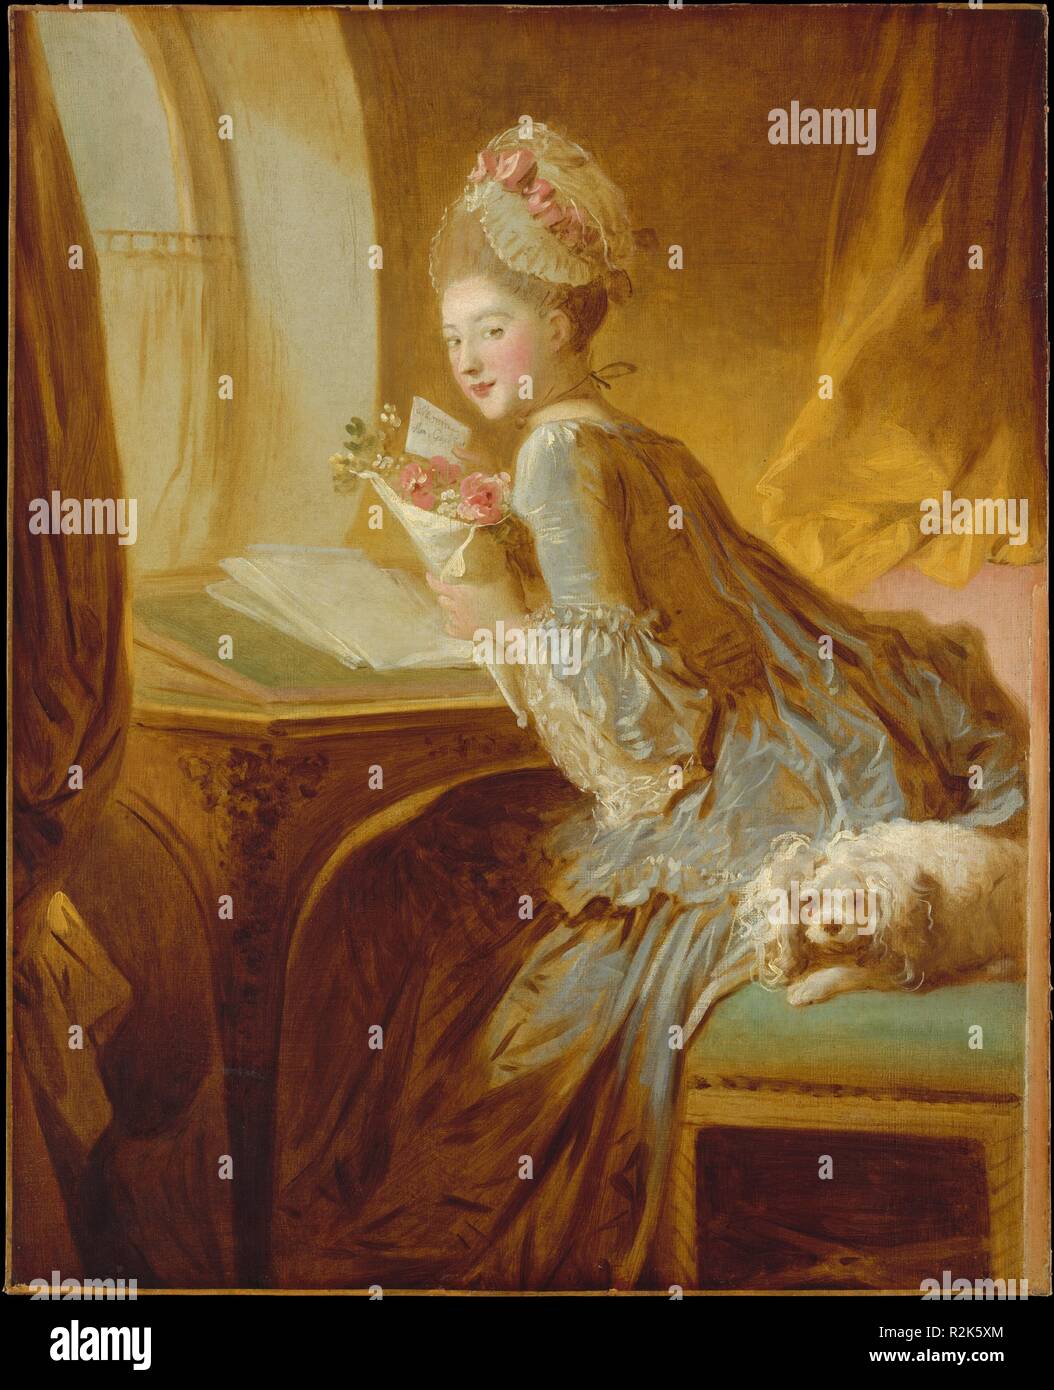 The Love Letter. Artist: Jean Honoré Fragonard (French, Grasse 1732-1806 Paris). Dimensions: 32 3/4 x 26 3/8 in. (83.2 x 67 cm). Date: early 1770s.  In the work of Fragonard, finish is a relative term. Here, over a brown tone, Fragonard shapes the composition in darker shades of brown, drawing and modeling with the tip of the brush and with strokes of varying thickness. Color and white are confined to passages under strong light toward the center of the canvas: the young woman's powdered face, her dress and cap, writing surface and stool, flowers and dog. A famous canvas from the early 1770s,  Stock Photo